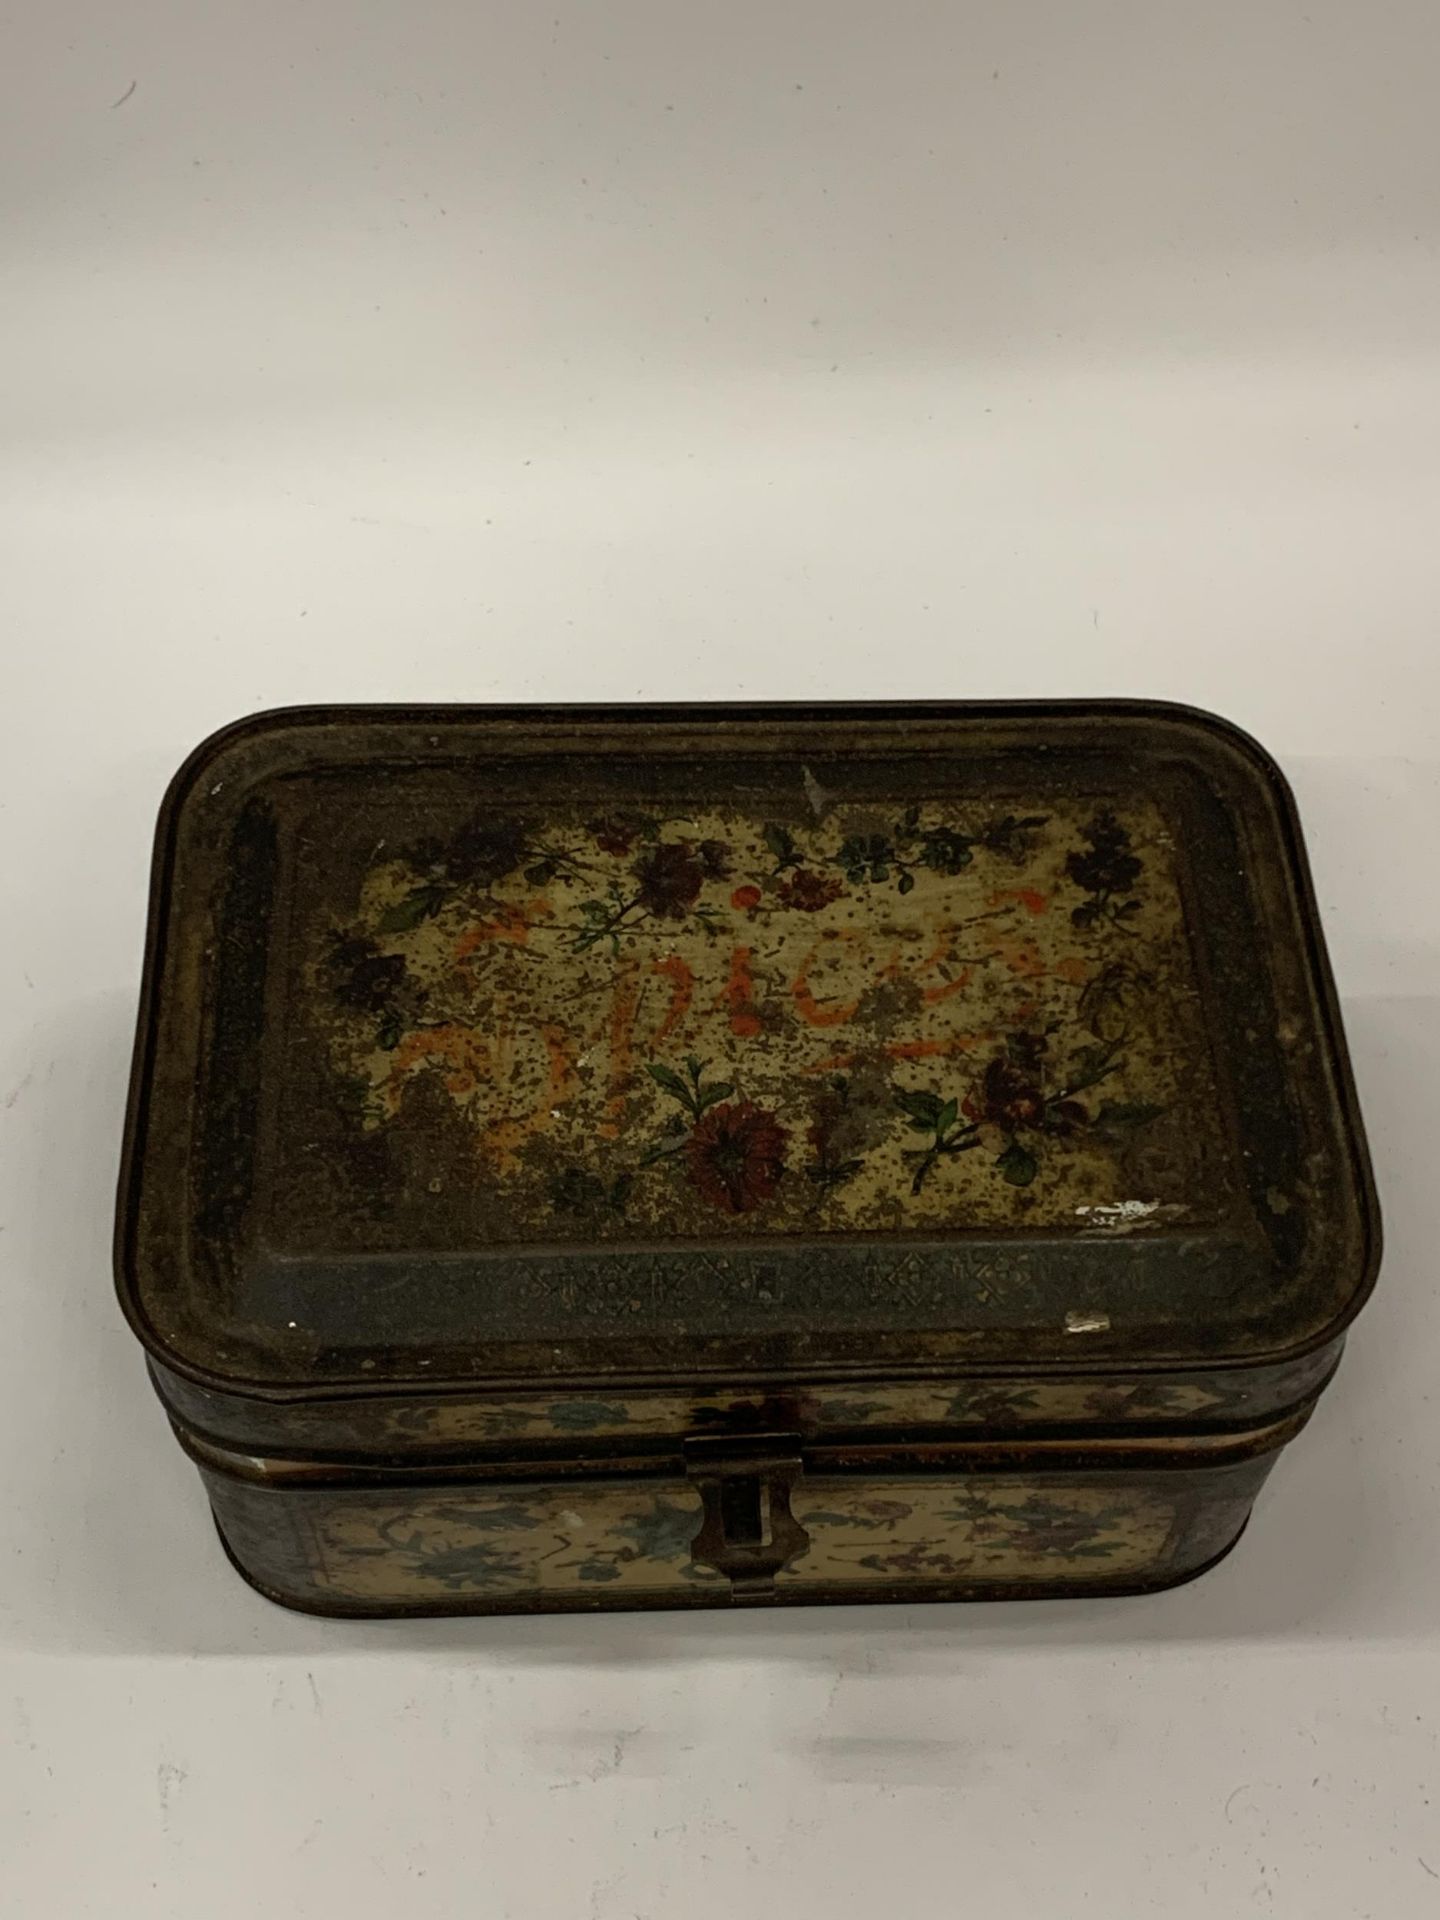 A VINTAGE 1940'S TIN METAL SPICE CHEST WITH SIX INNER LIDDED SPICE CONTAINERS - Image 5 of 6